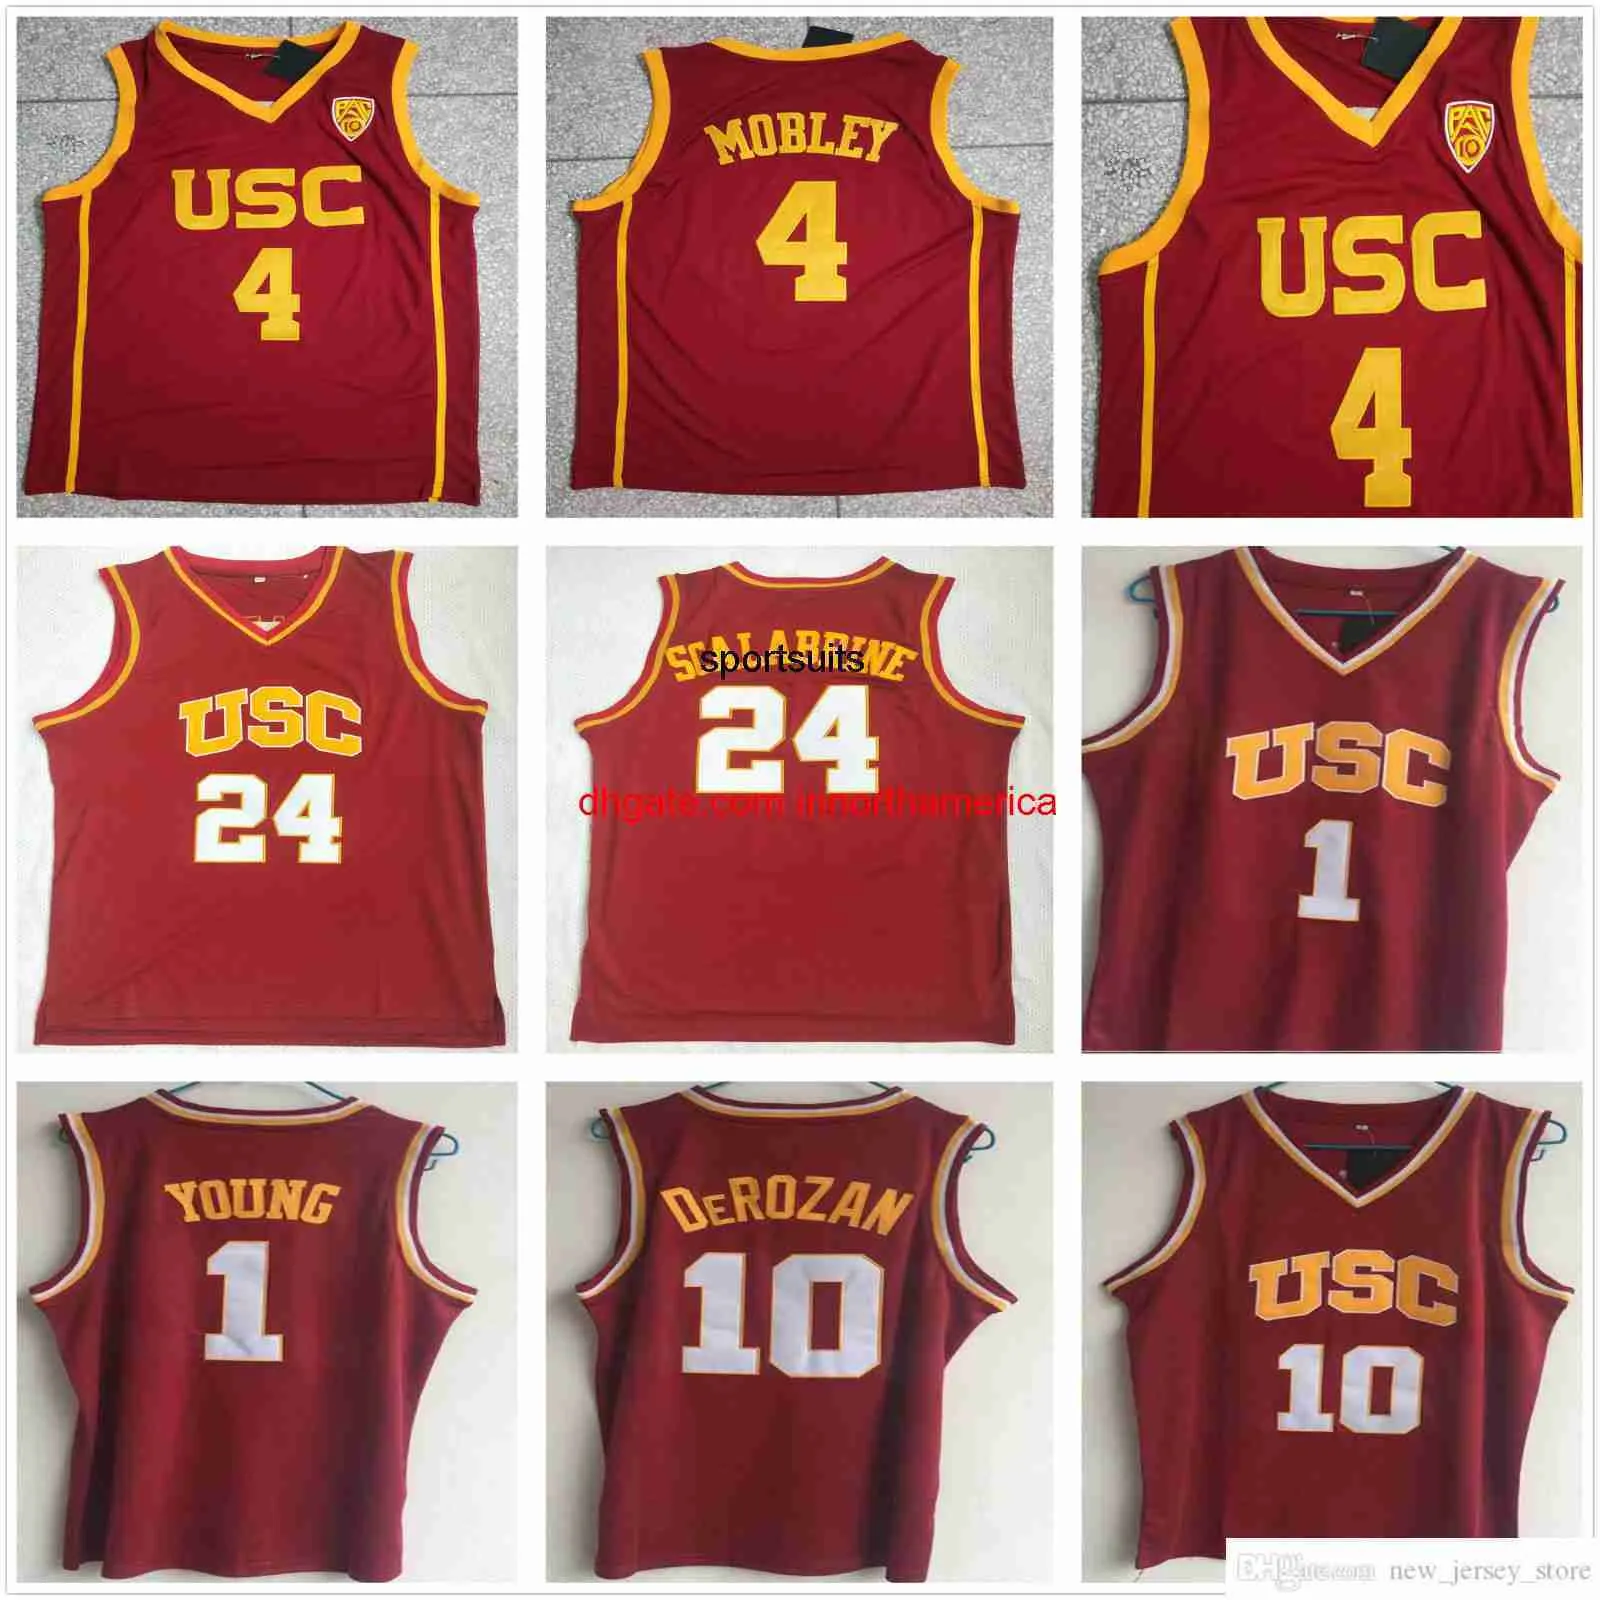 Stitched Vintage NCAA USC Trojans College Basketball Jerseys 4 Evan Mobley 24 Brian Scalabrine Nick 1 Young Demar 10 Derozan Jersey Red